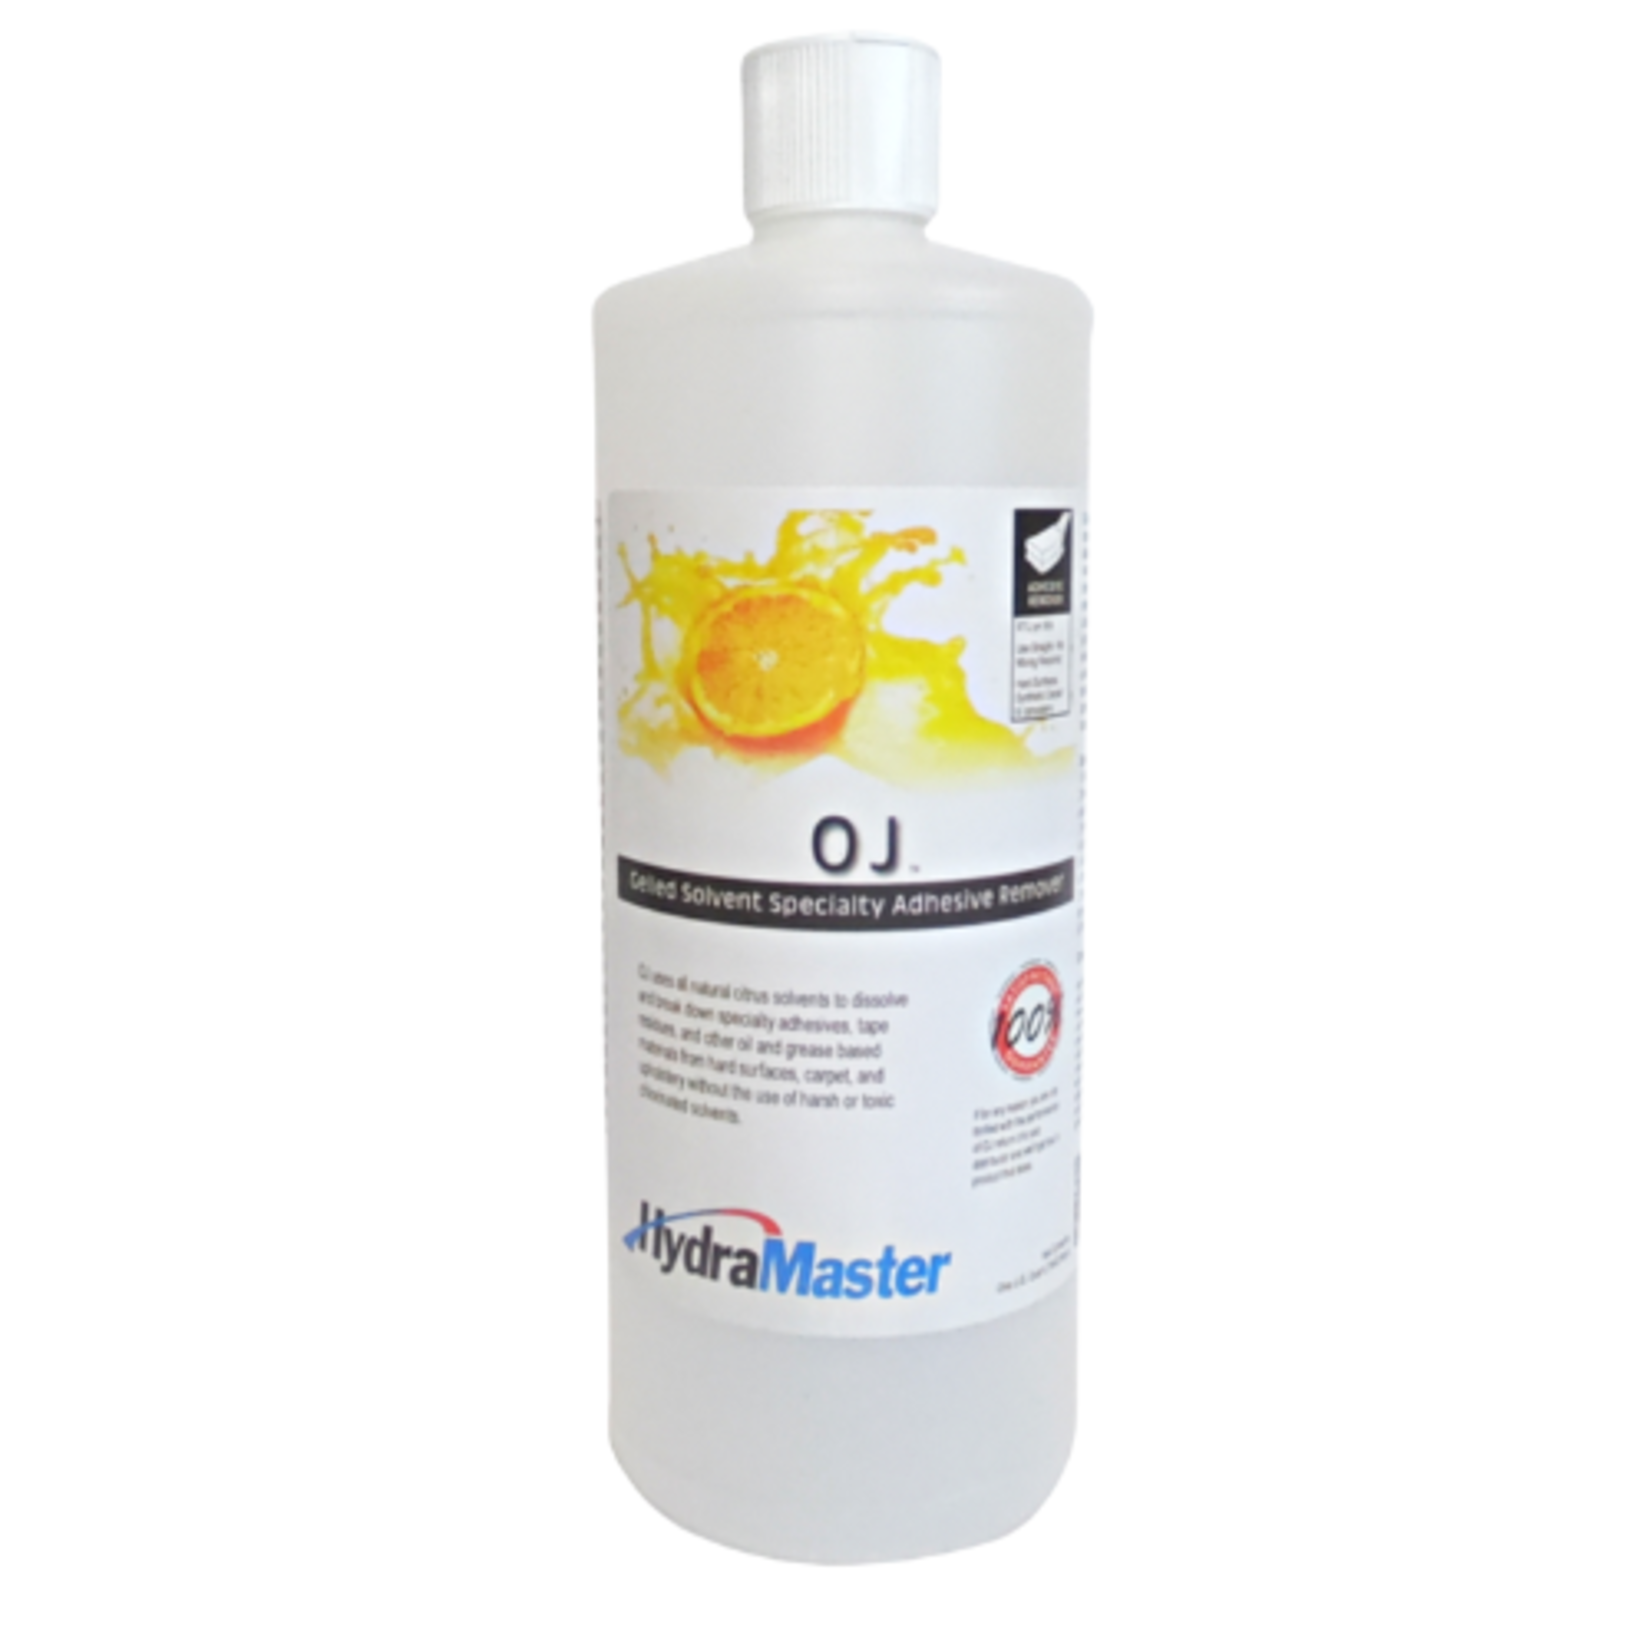 HydraMaster OJ Gelled Citrus Solvent Specialty Adhesive Remover